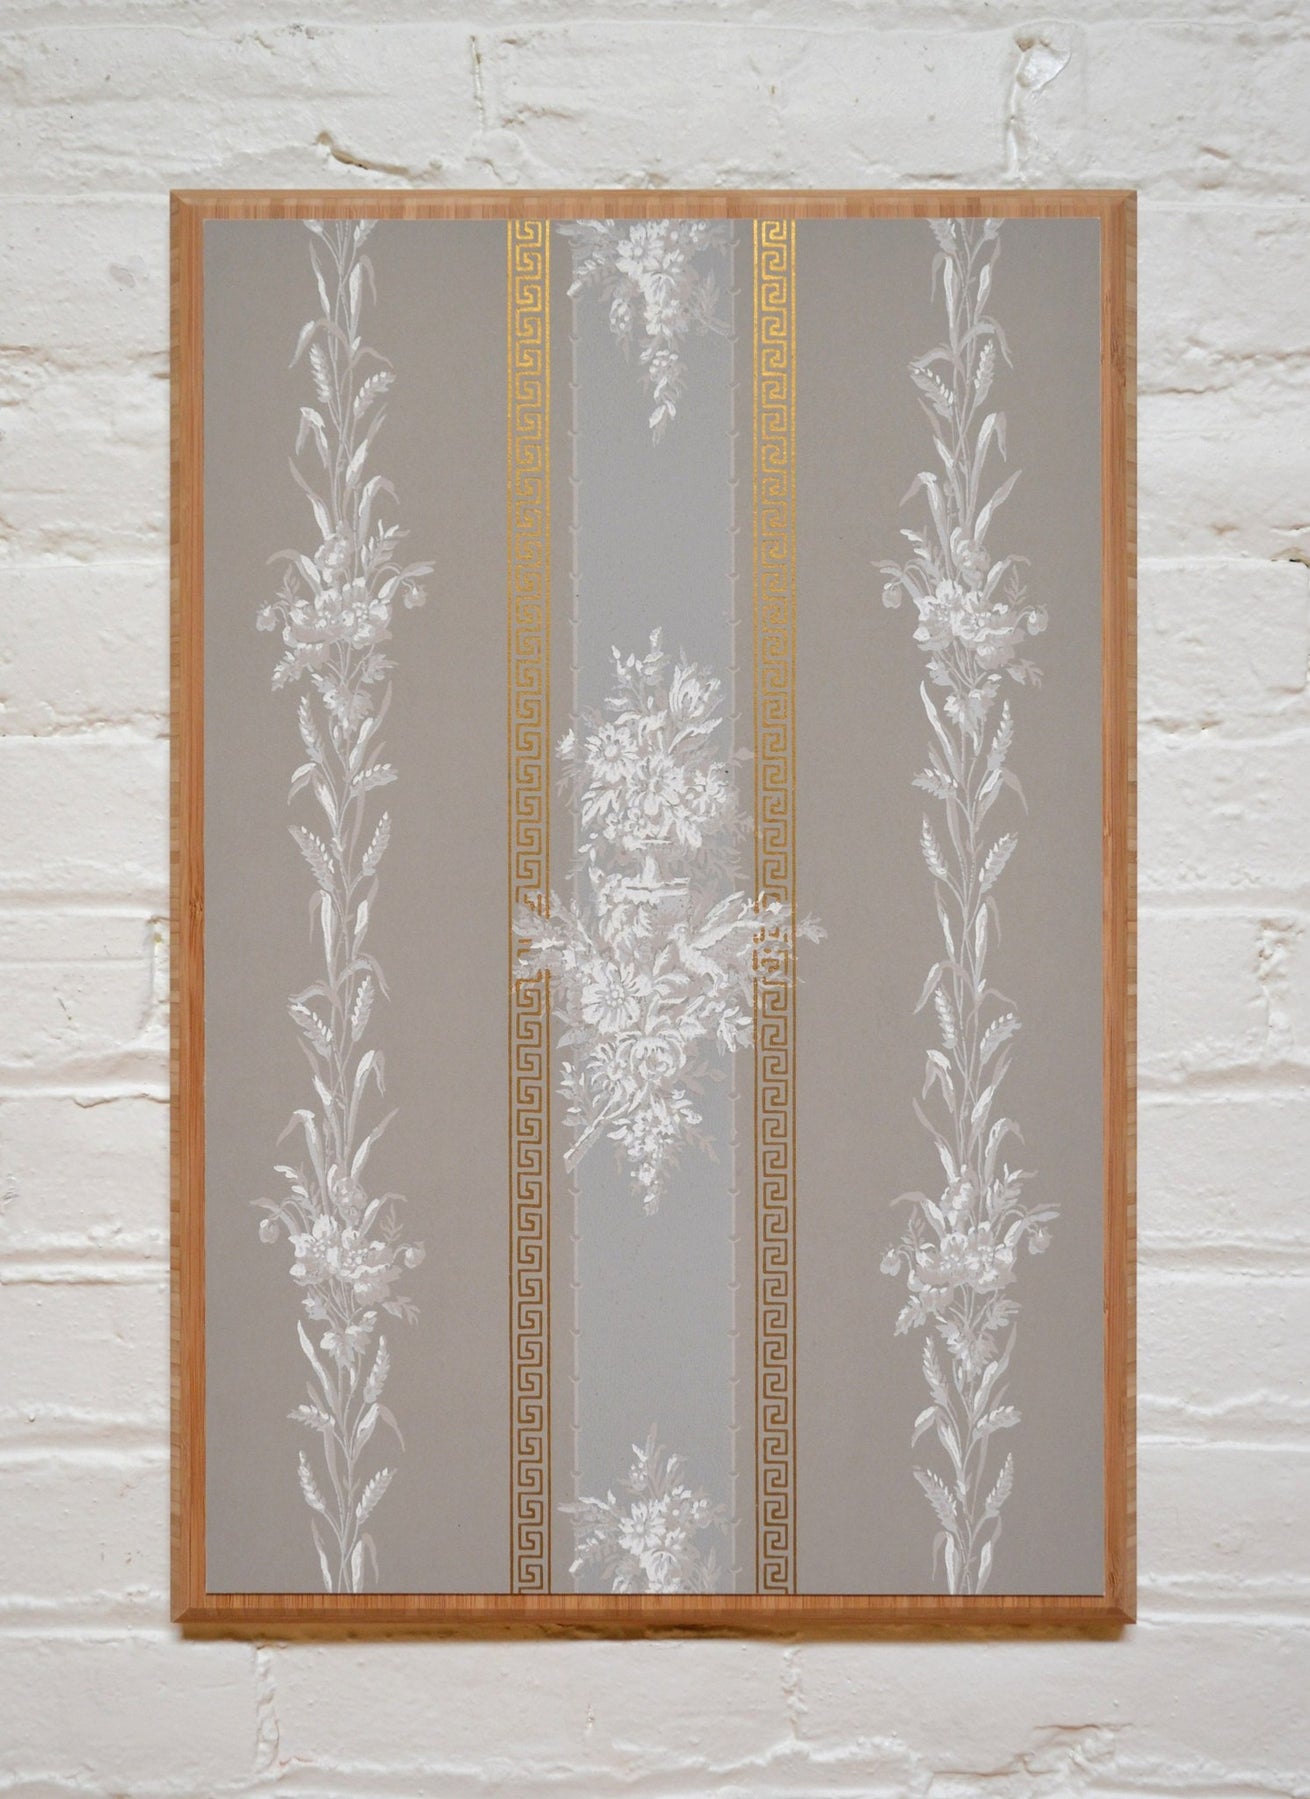 Flowers and Wheat on Gilt Grey Stripes - Mounted Antique Wallpaper Panel